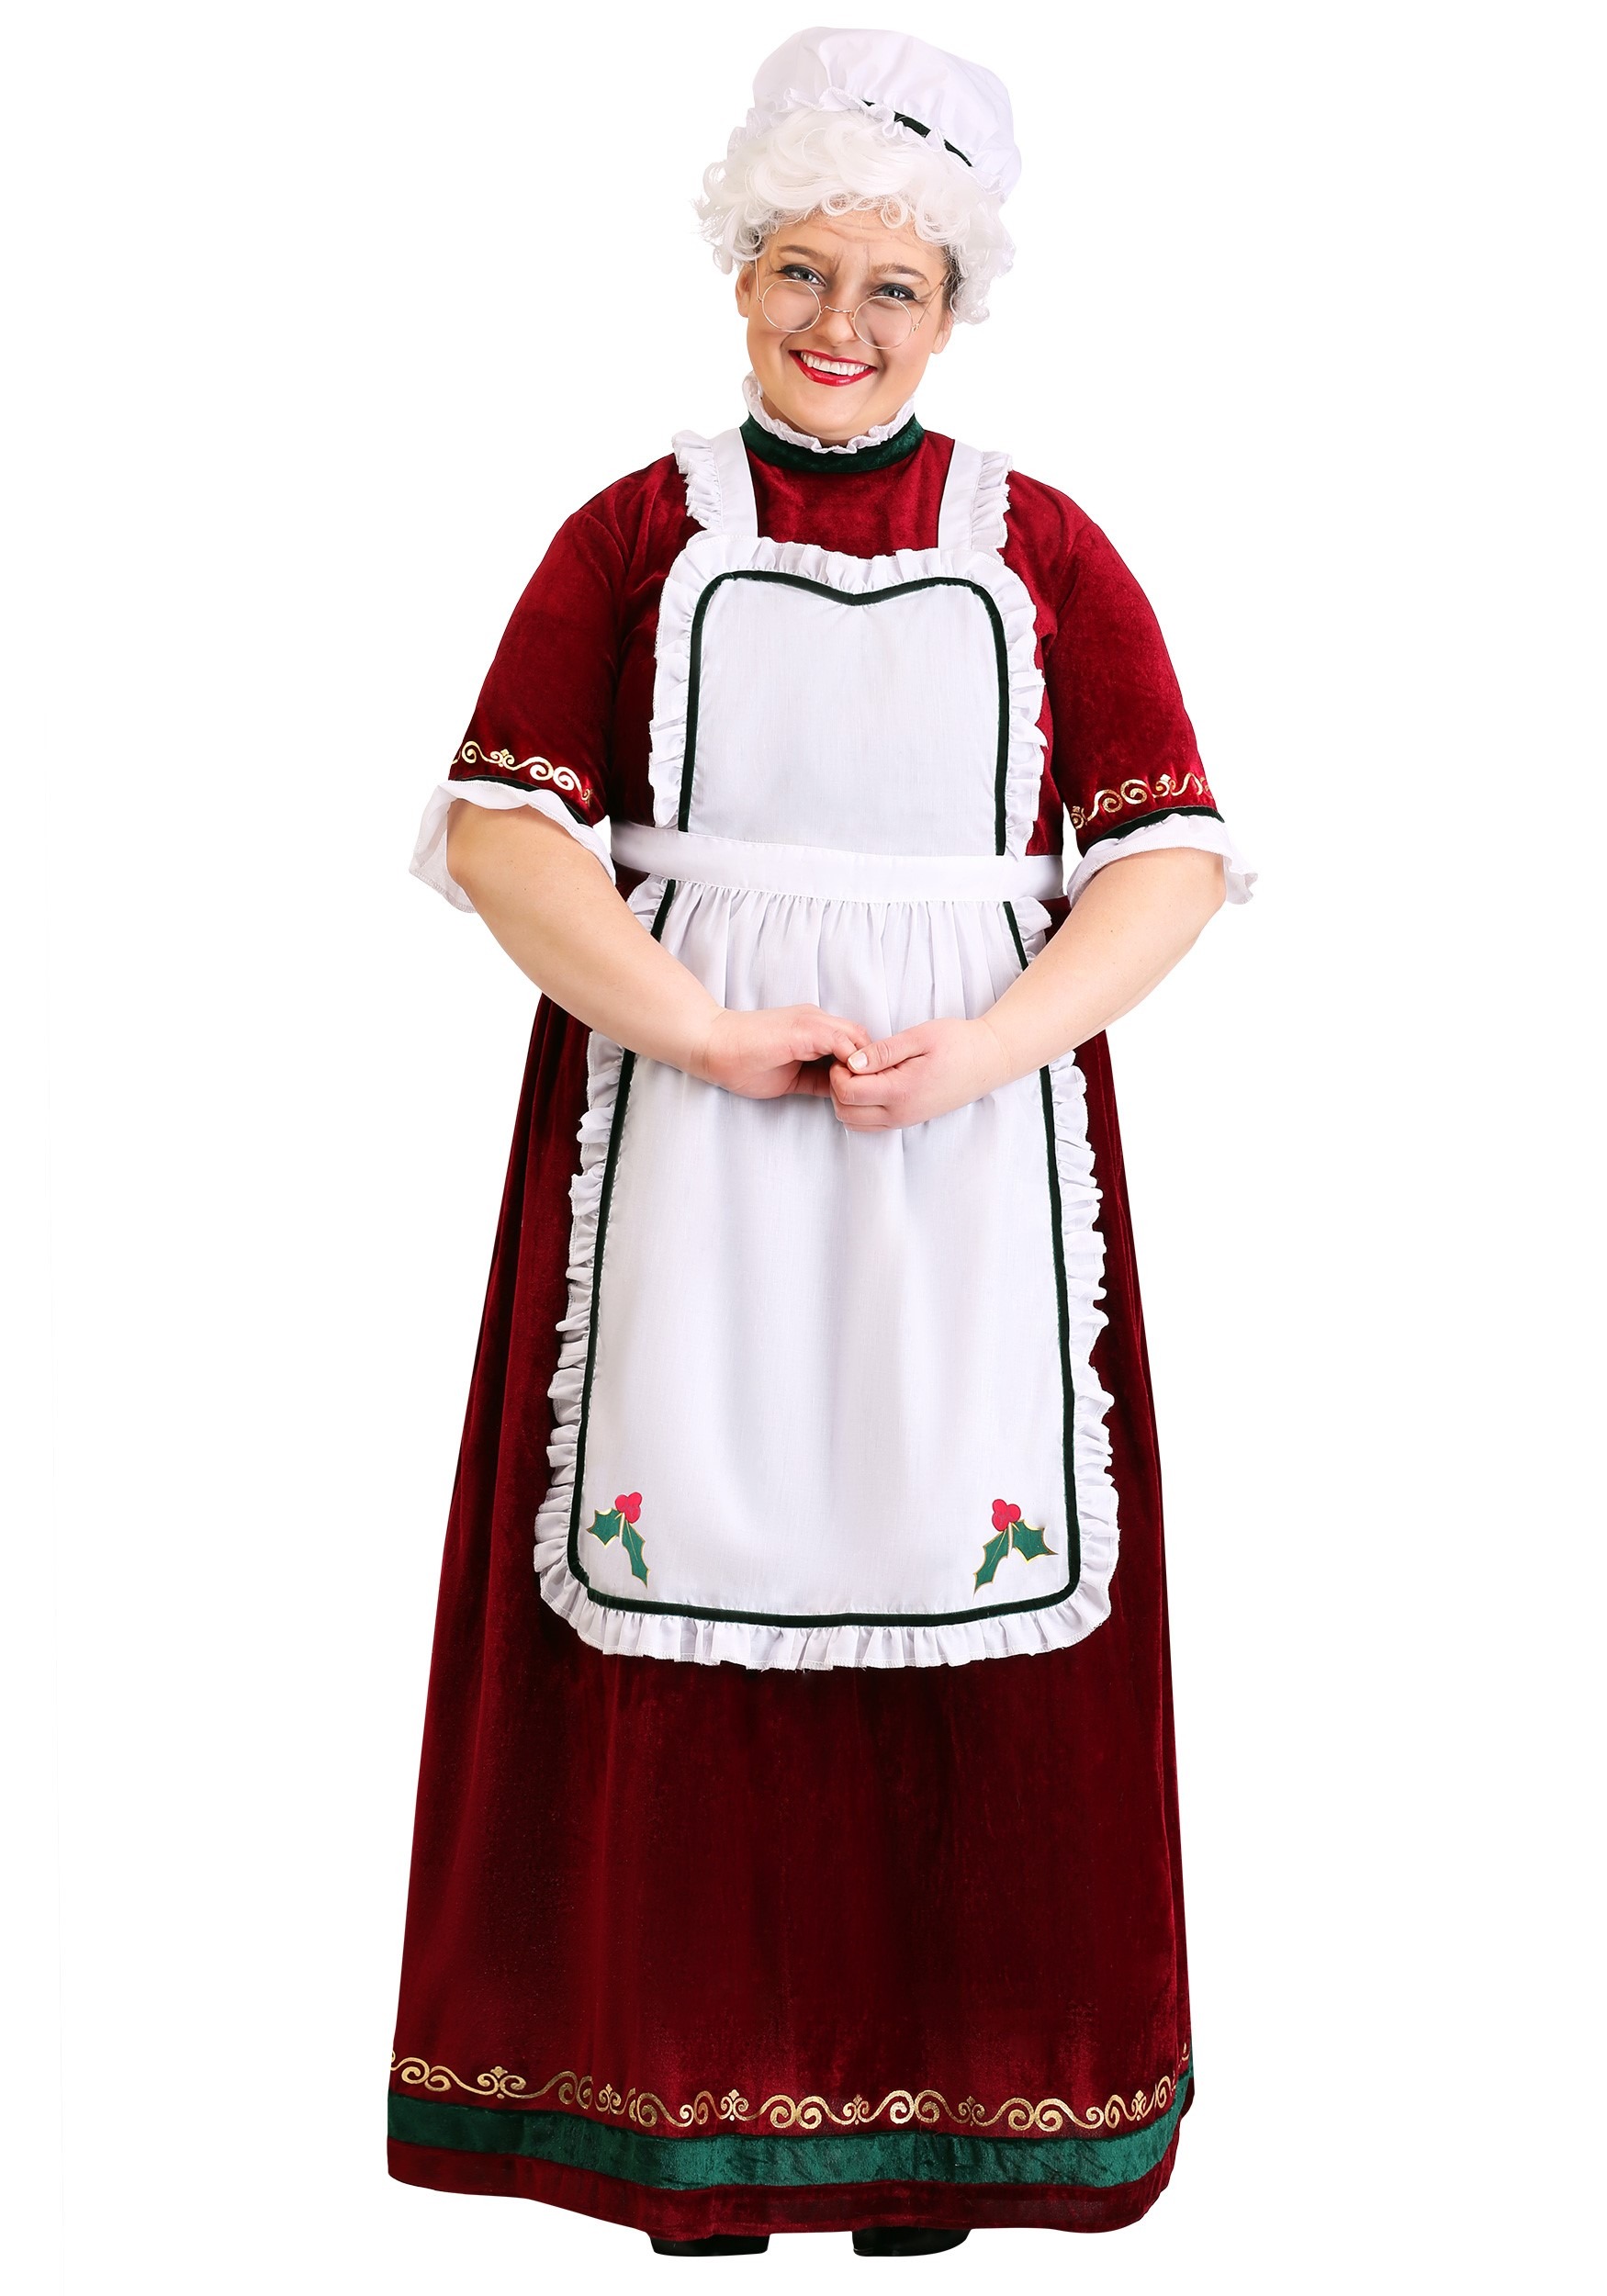 Mrs. Claus Plus Size Women's Holiday Costume